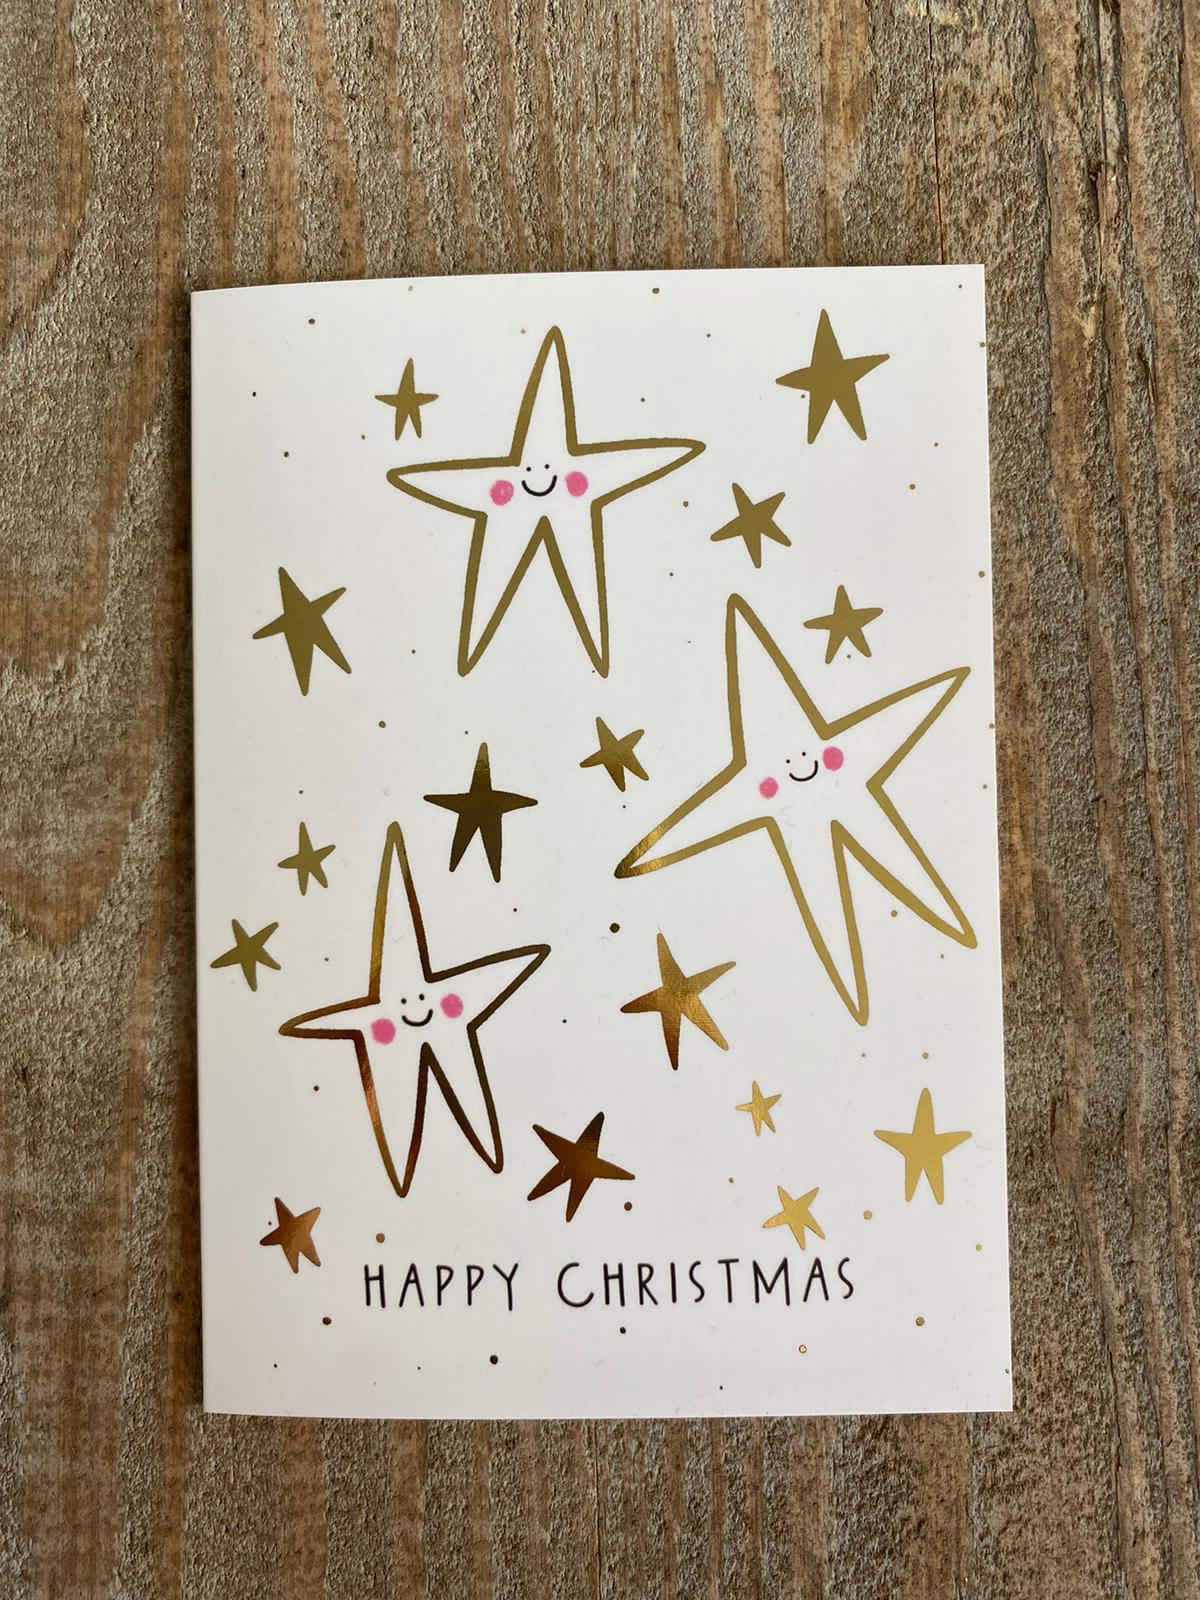 *Sands Christmas ‘Star’ Card designed by our own Stormiehud